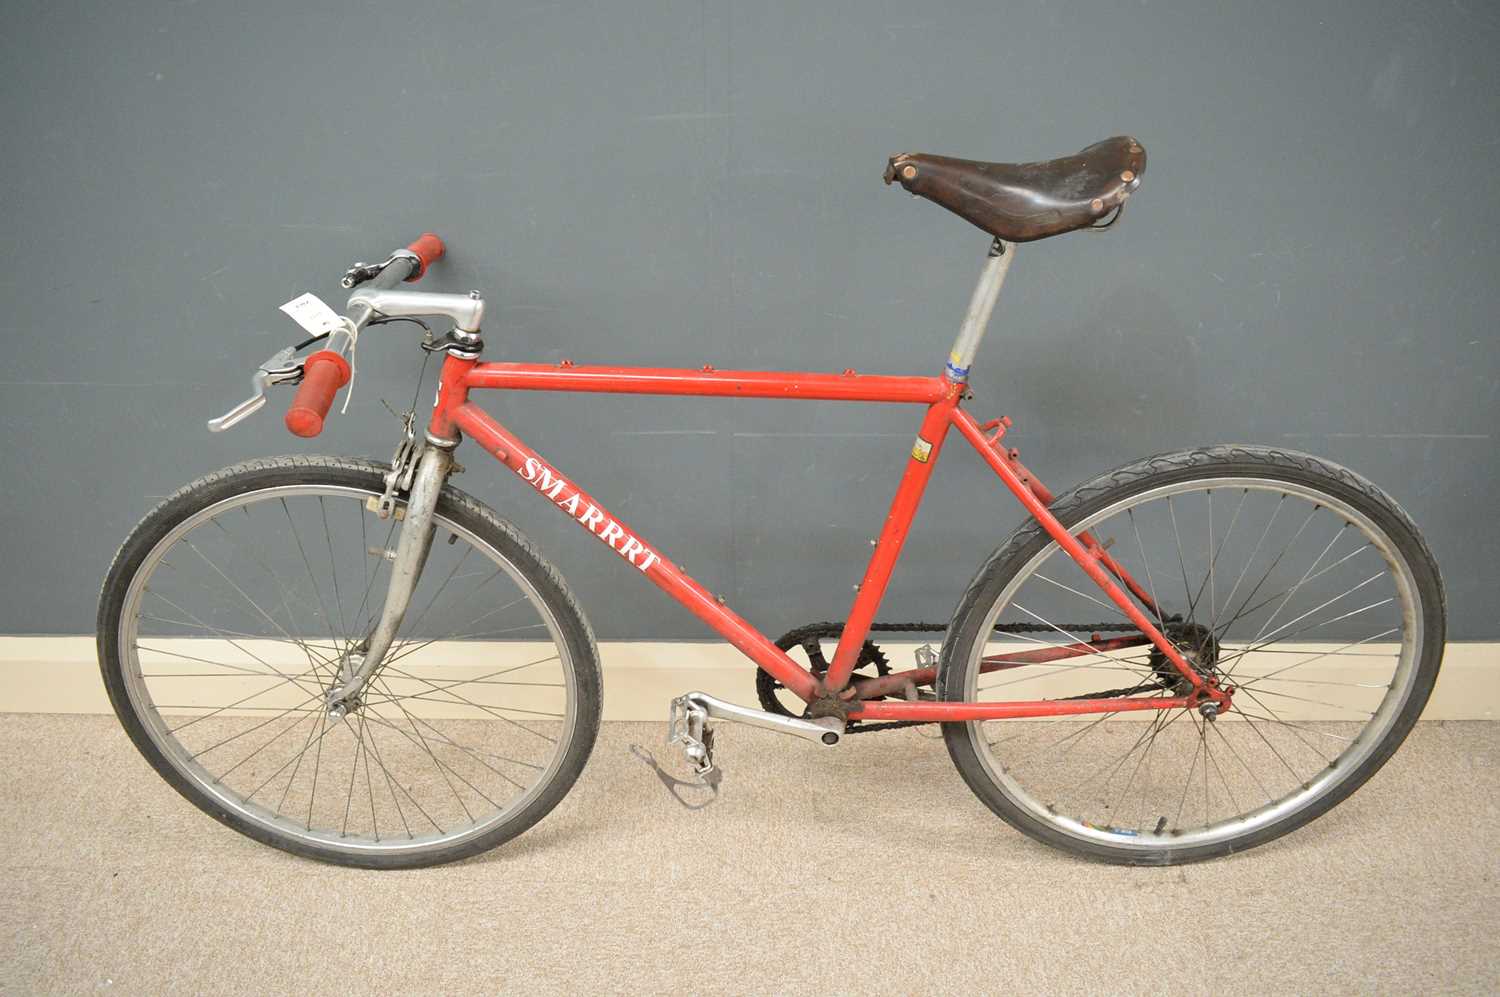 Lot 703 - A single-speed hybrid bicycle.